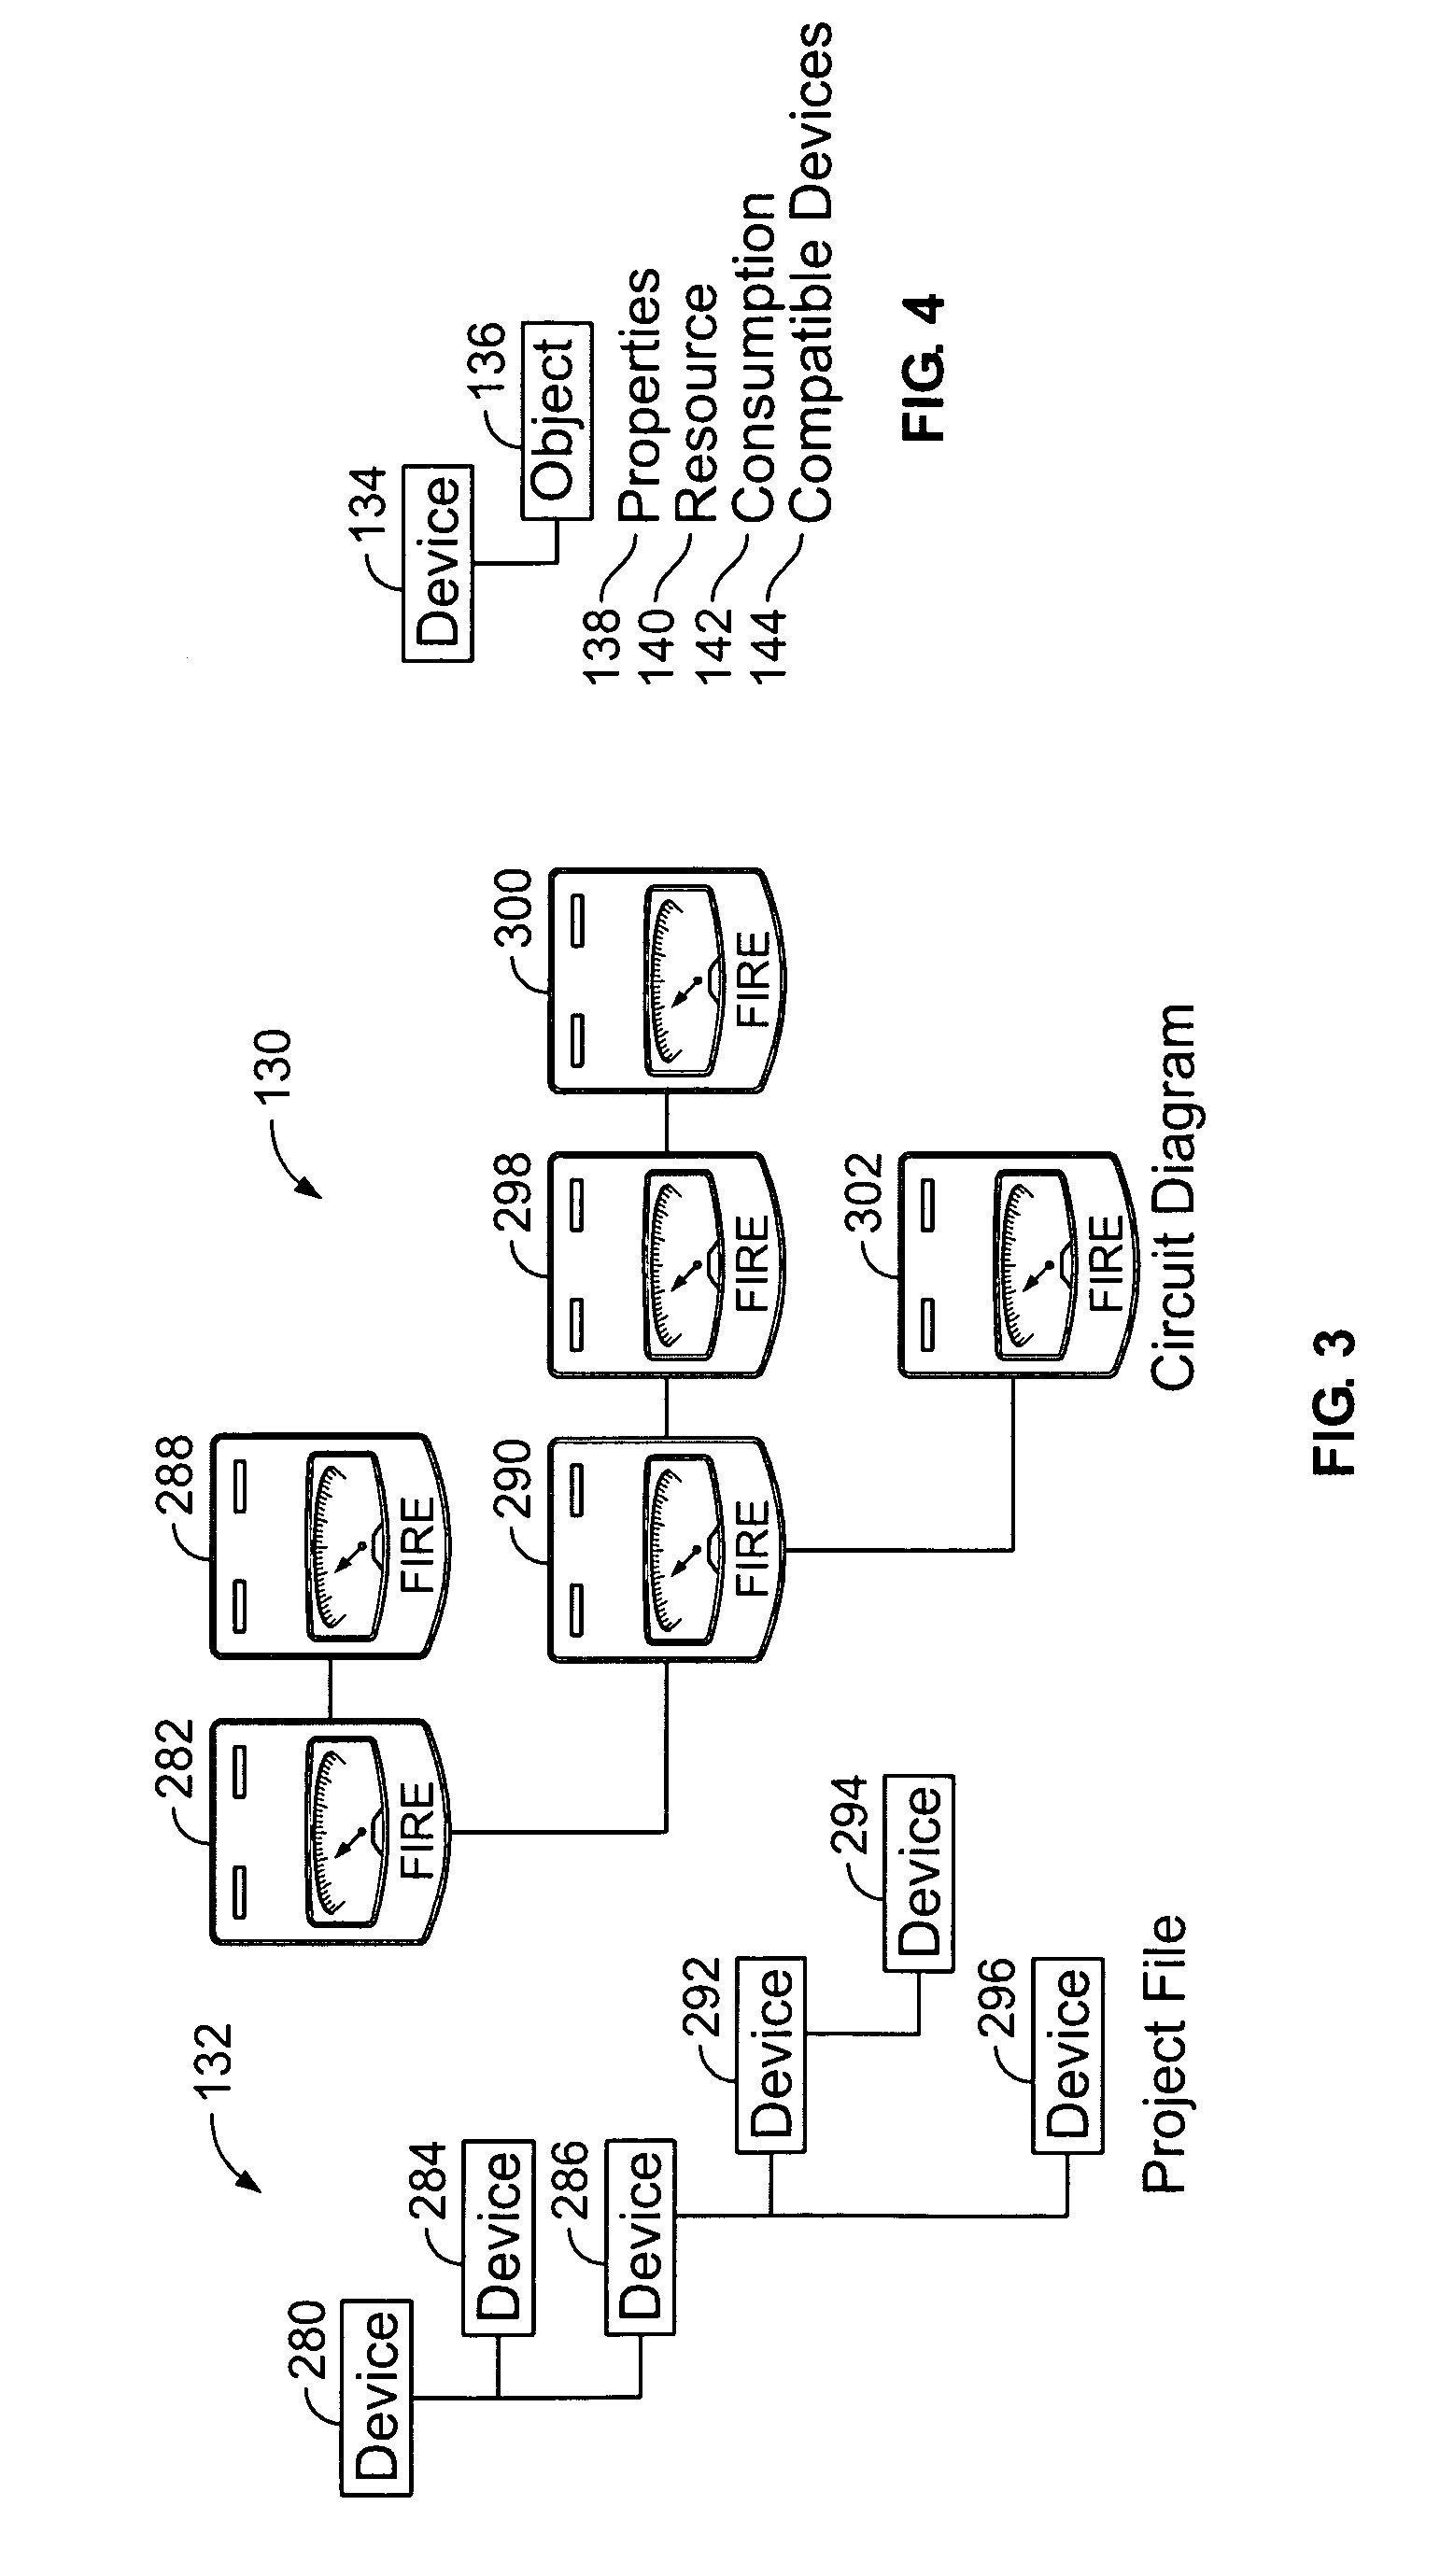 Method and apparatus for calculating voltage drop